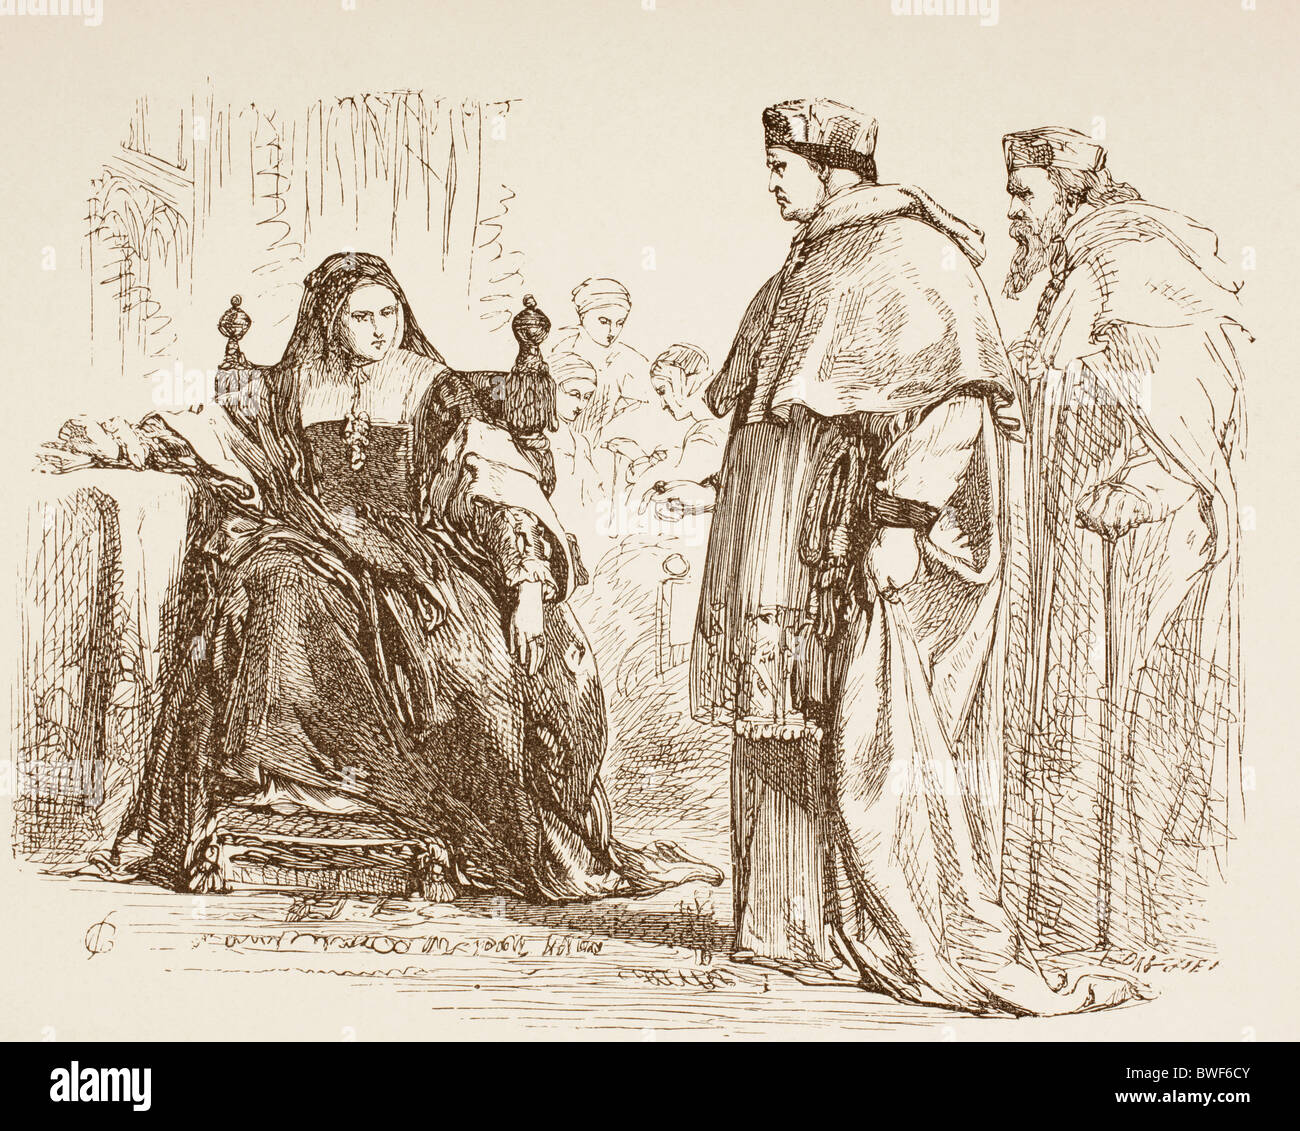 King Henry VIII by William Shakespeare. Cardinal Wolsey and Queen Katharine. Stock Photo